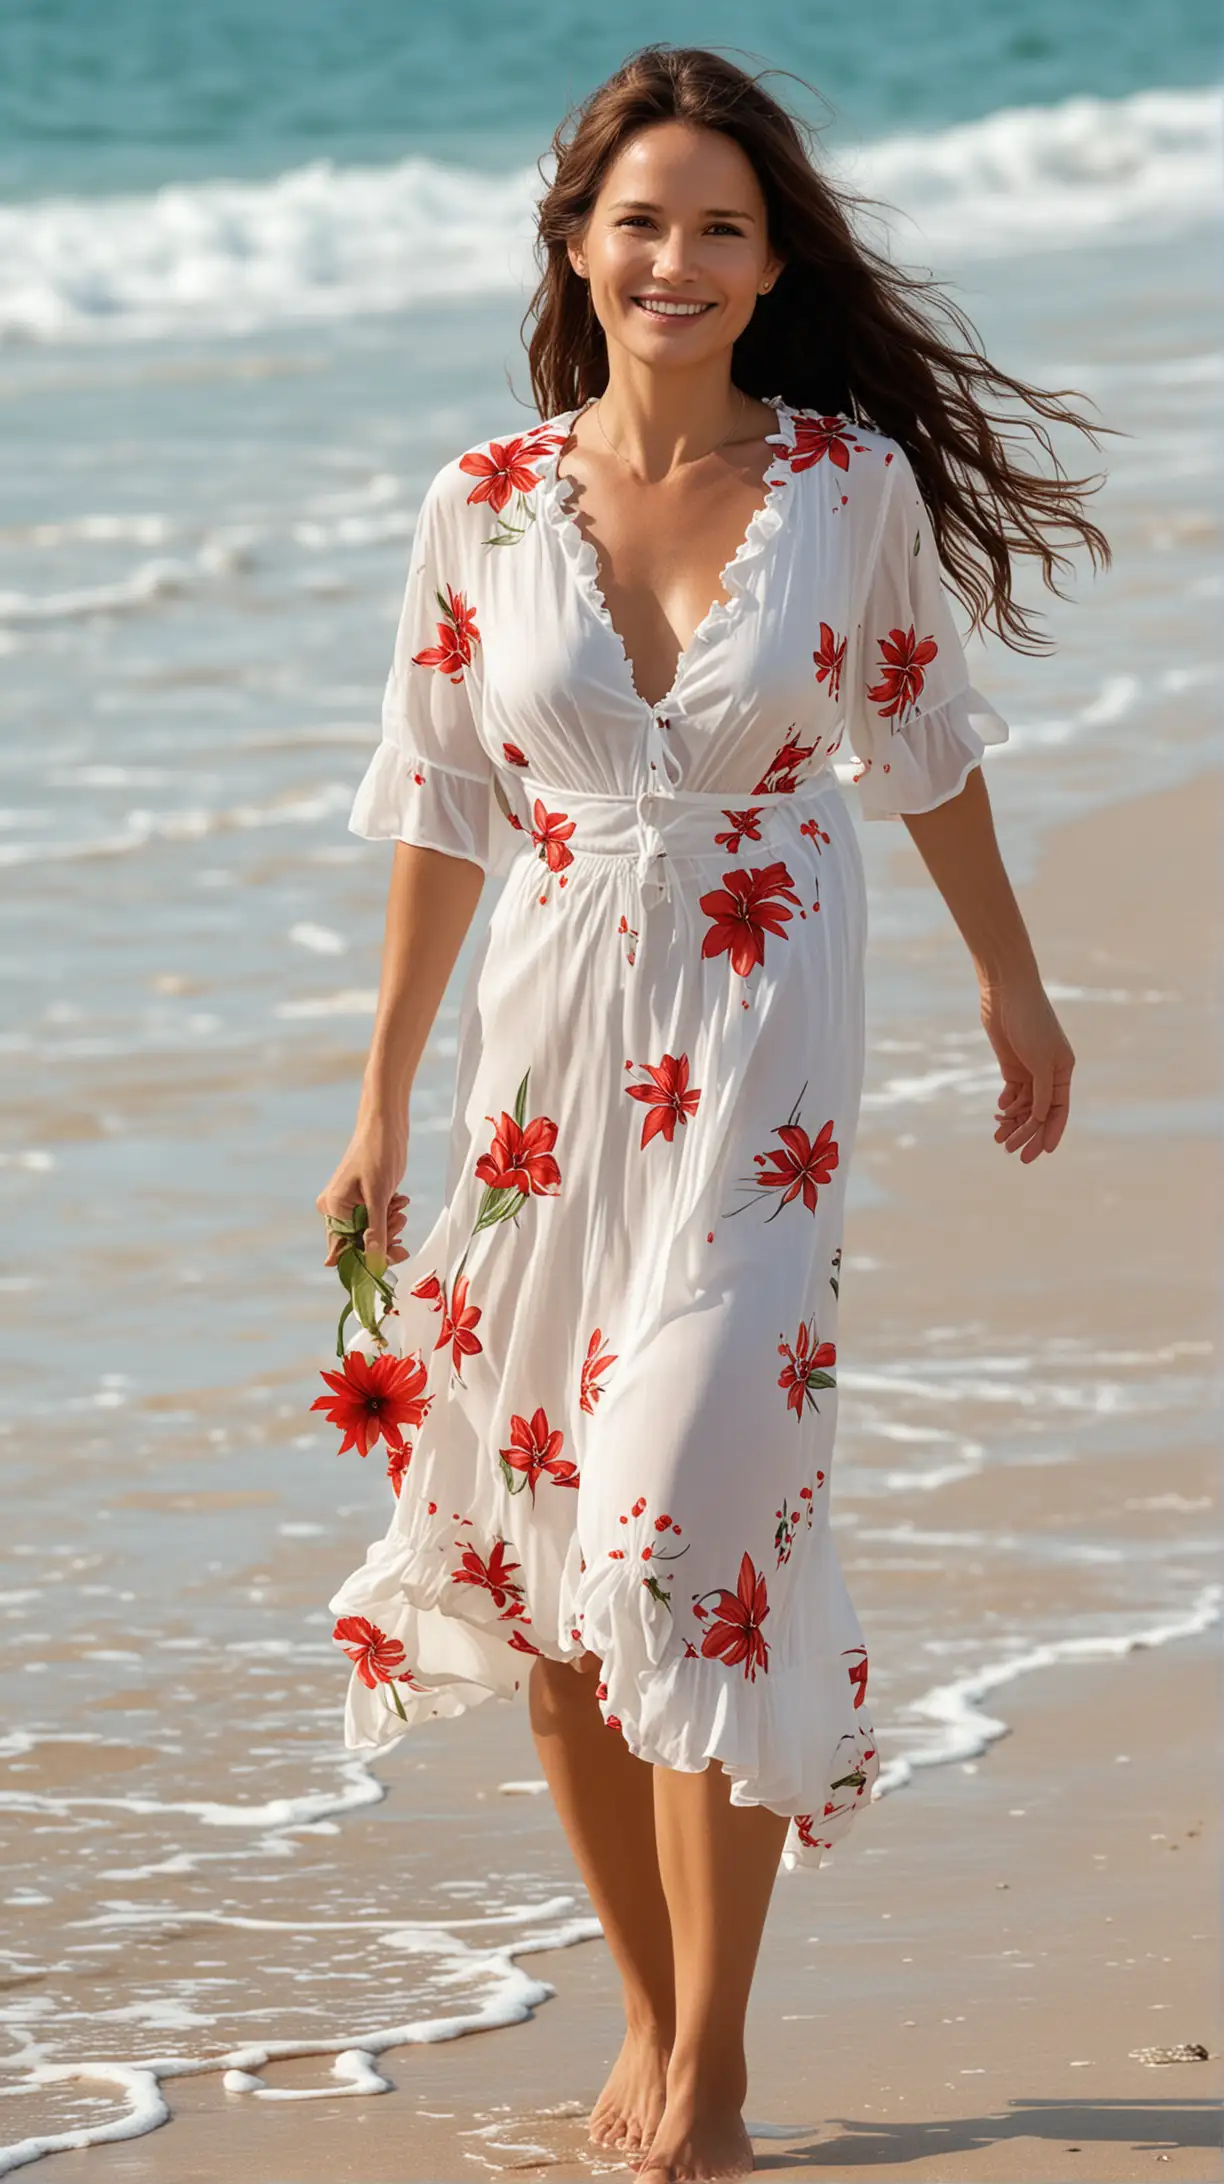 A slim realistic Virginie Ledoyen e regarde amoureusement sourire rafraîchissant wearing a 2 piece white tropical dress with a red flower in her long hair walking at the beach showing a full body shot from the top of his head to his feet